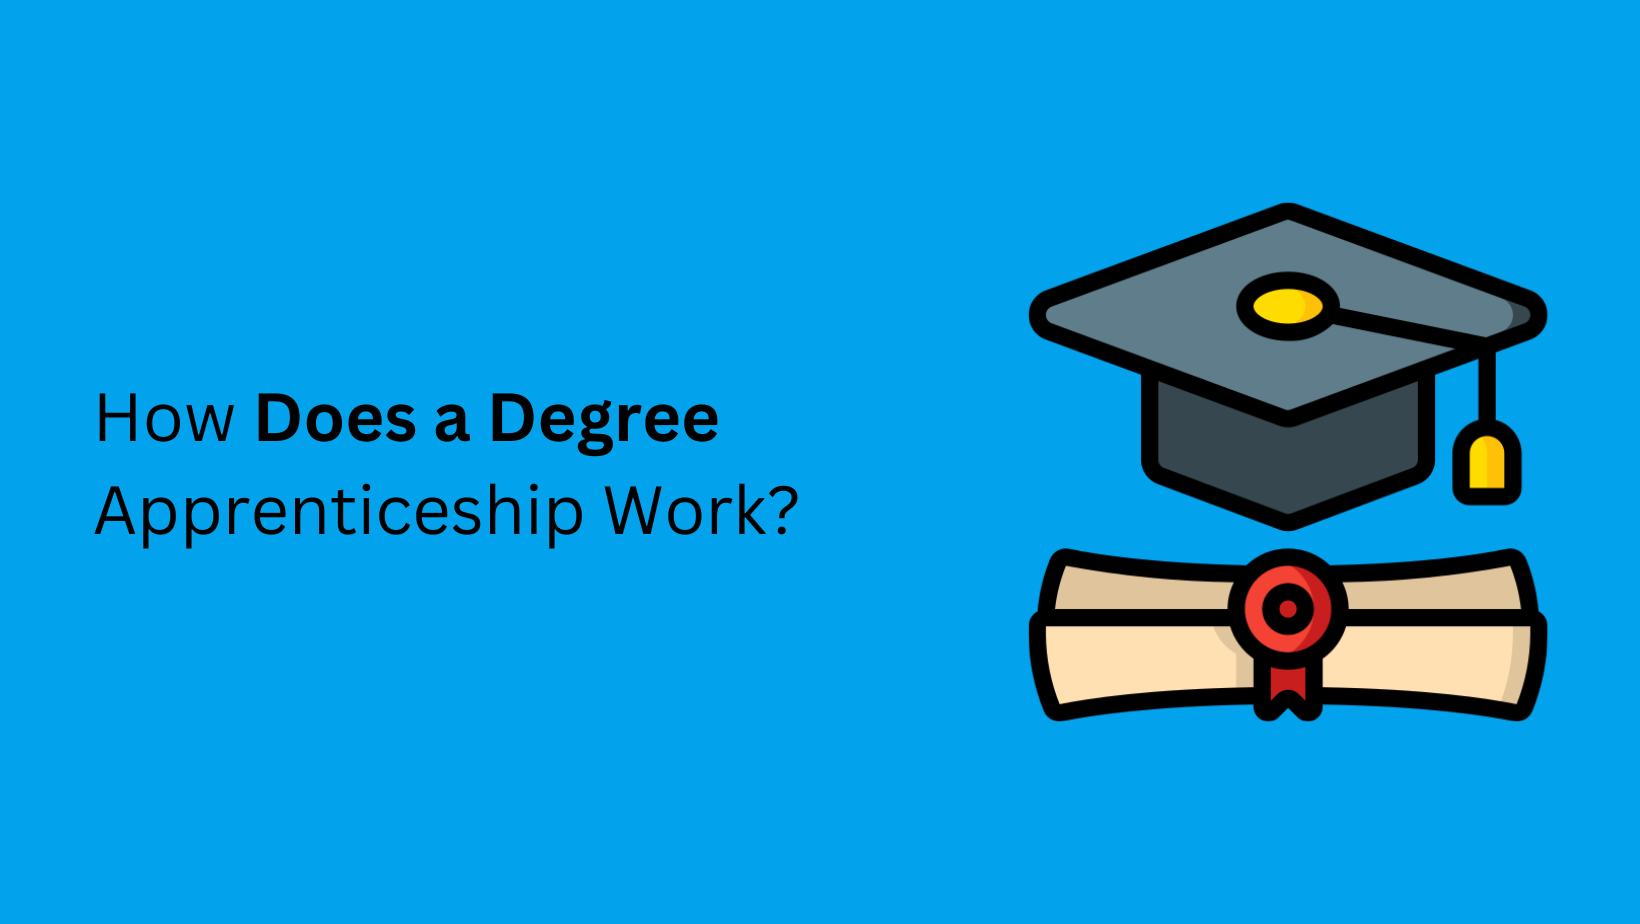 How Does a Degree Apprenticeship Work